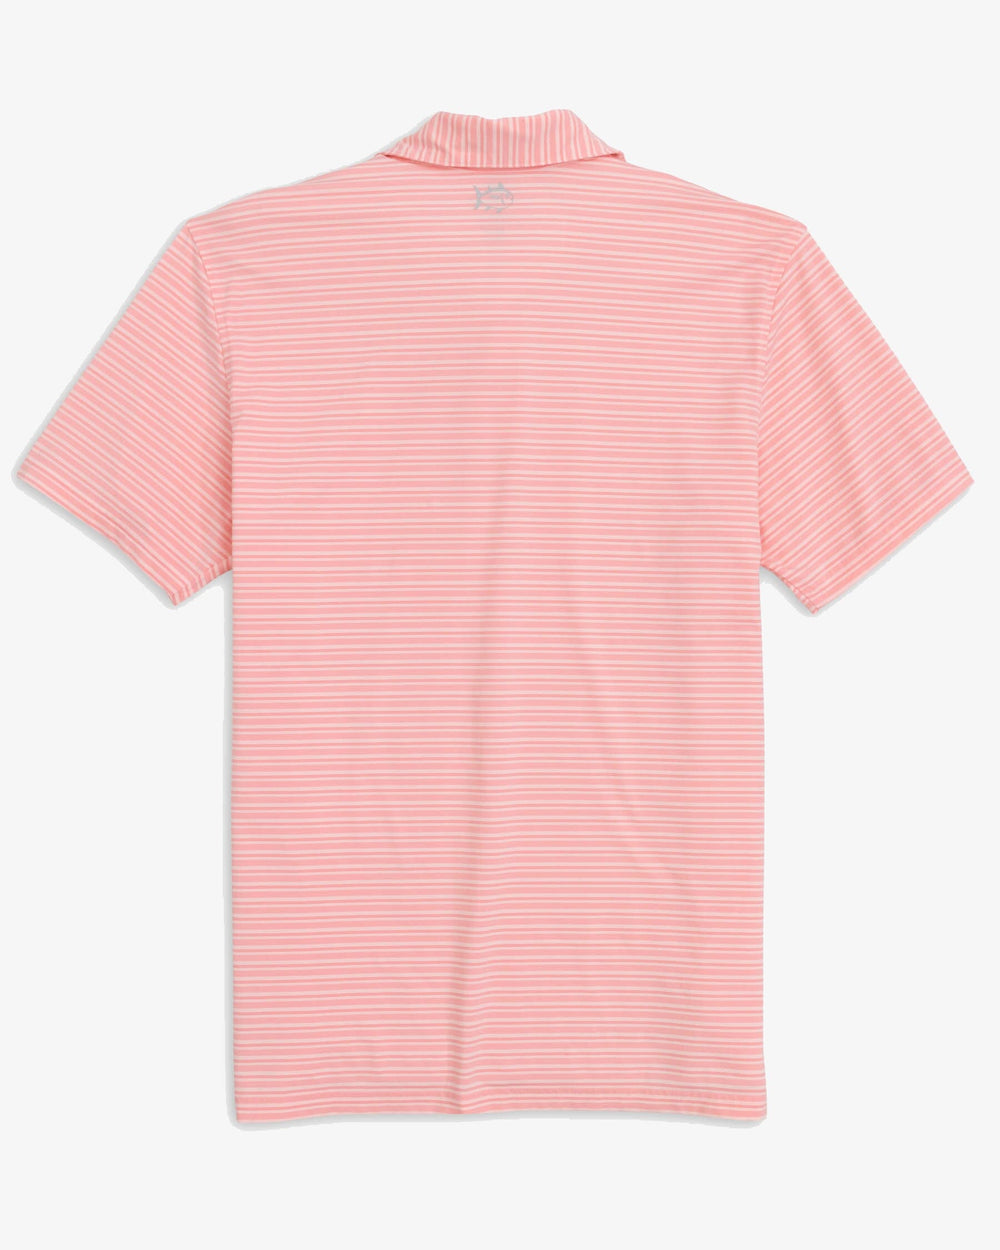 The back view of the Southern Tide brrr°®-eeze Bowen Stripe Performance Polo Shirt by Southern Tide - Rose Blush